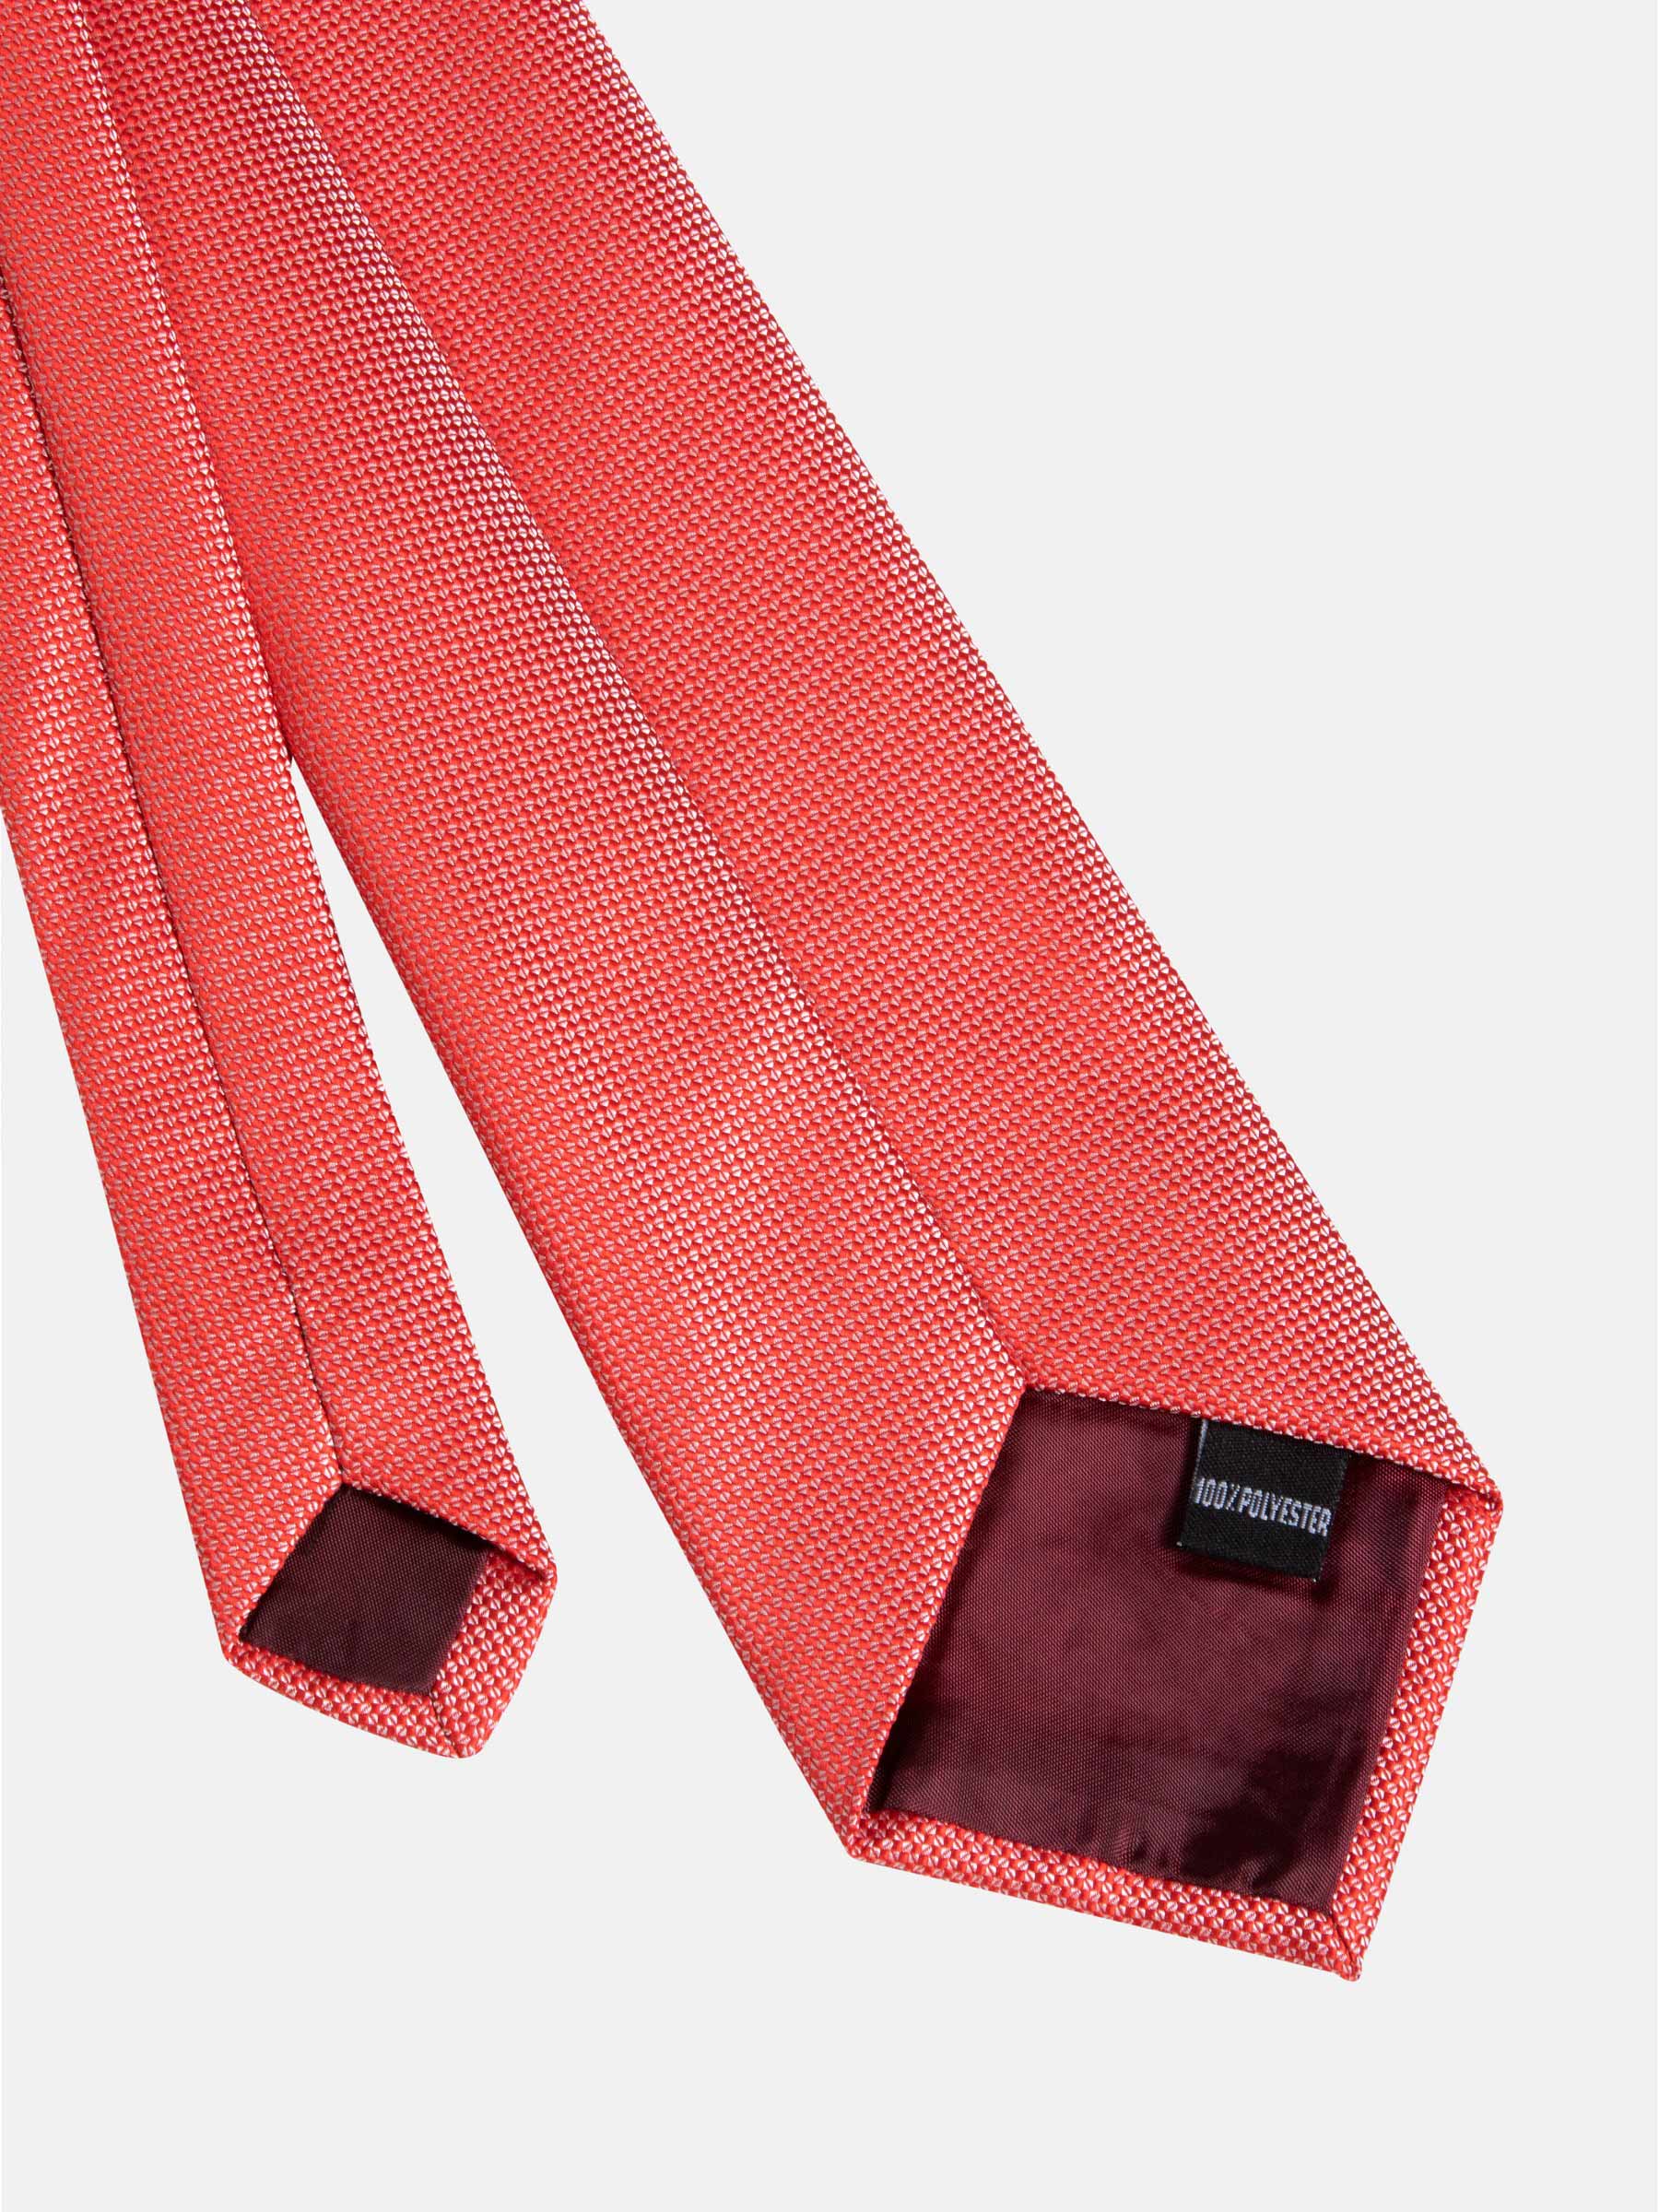 Tie 10000 Woven Red